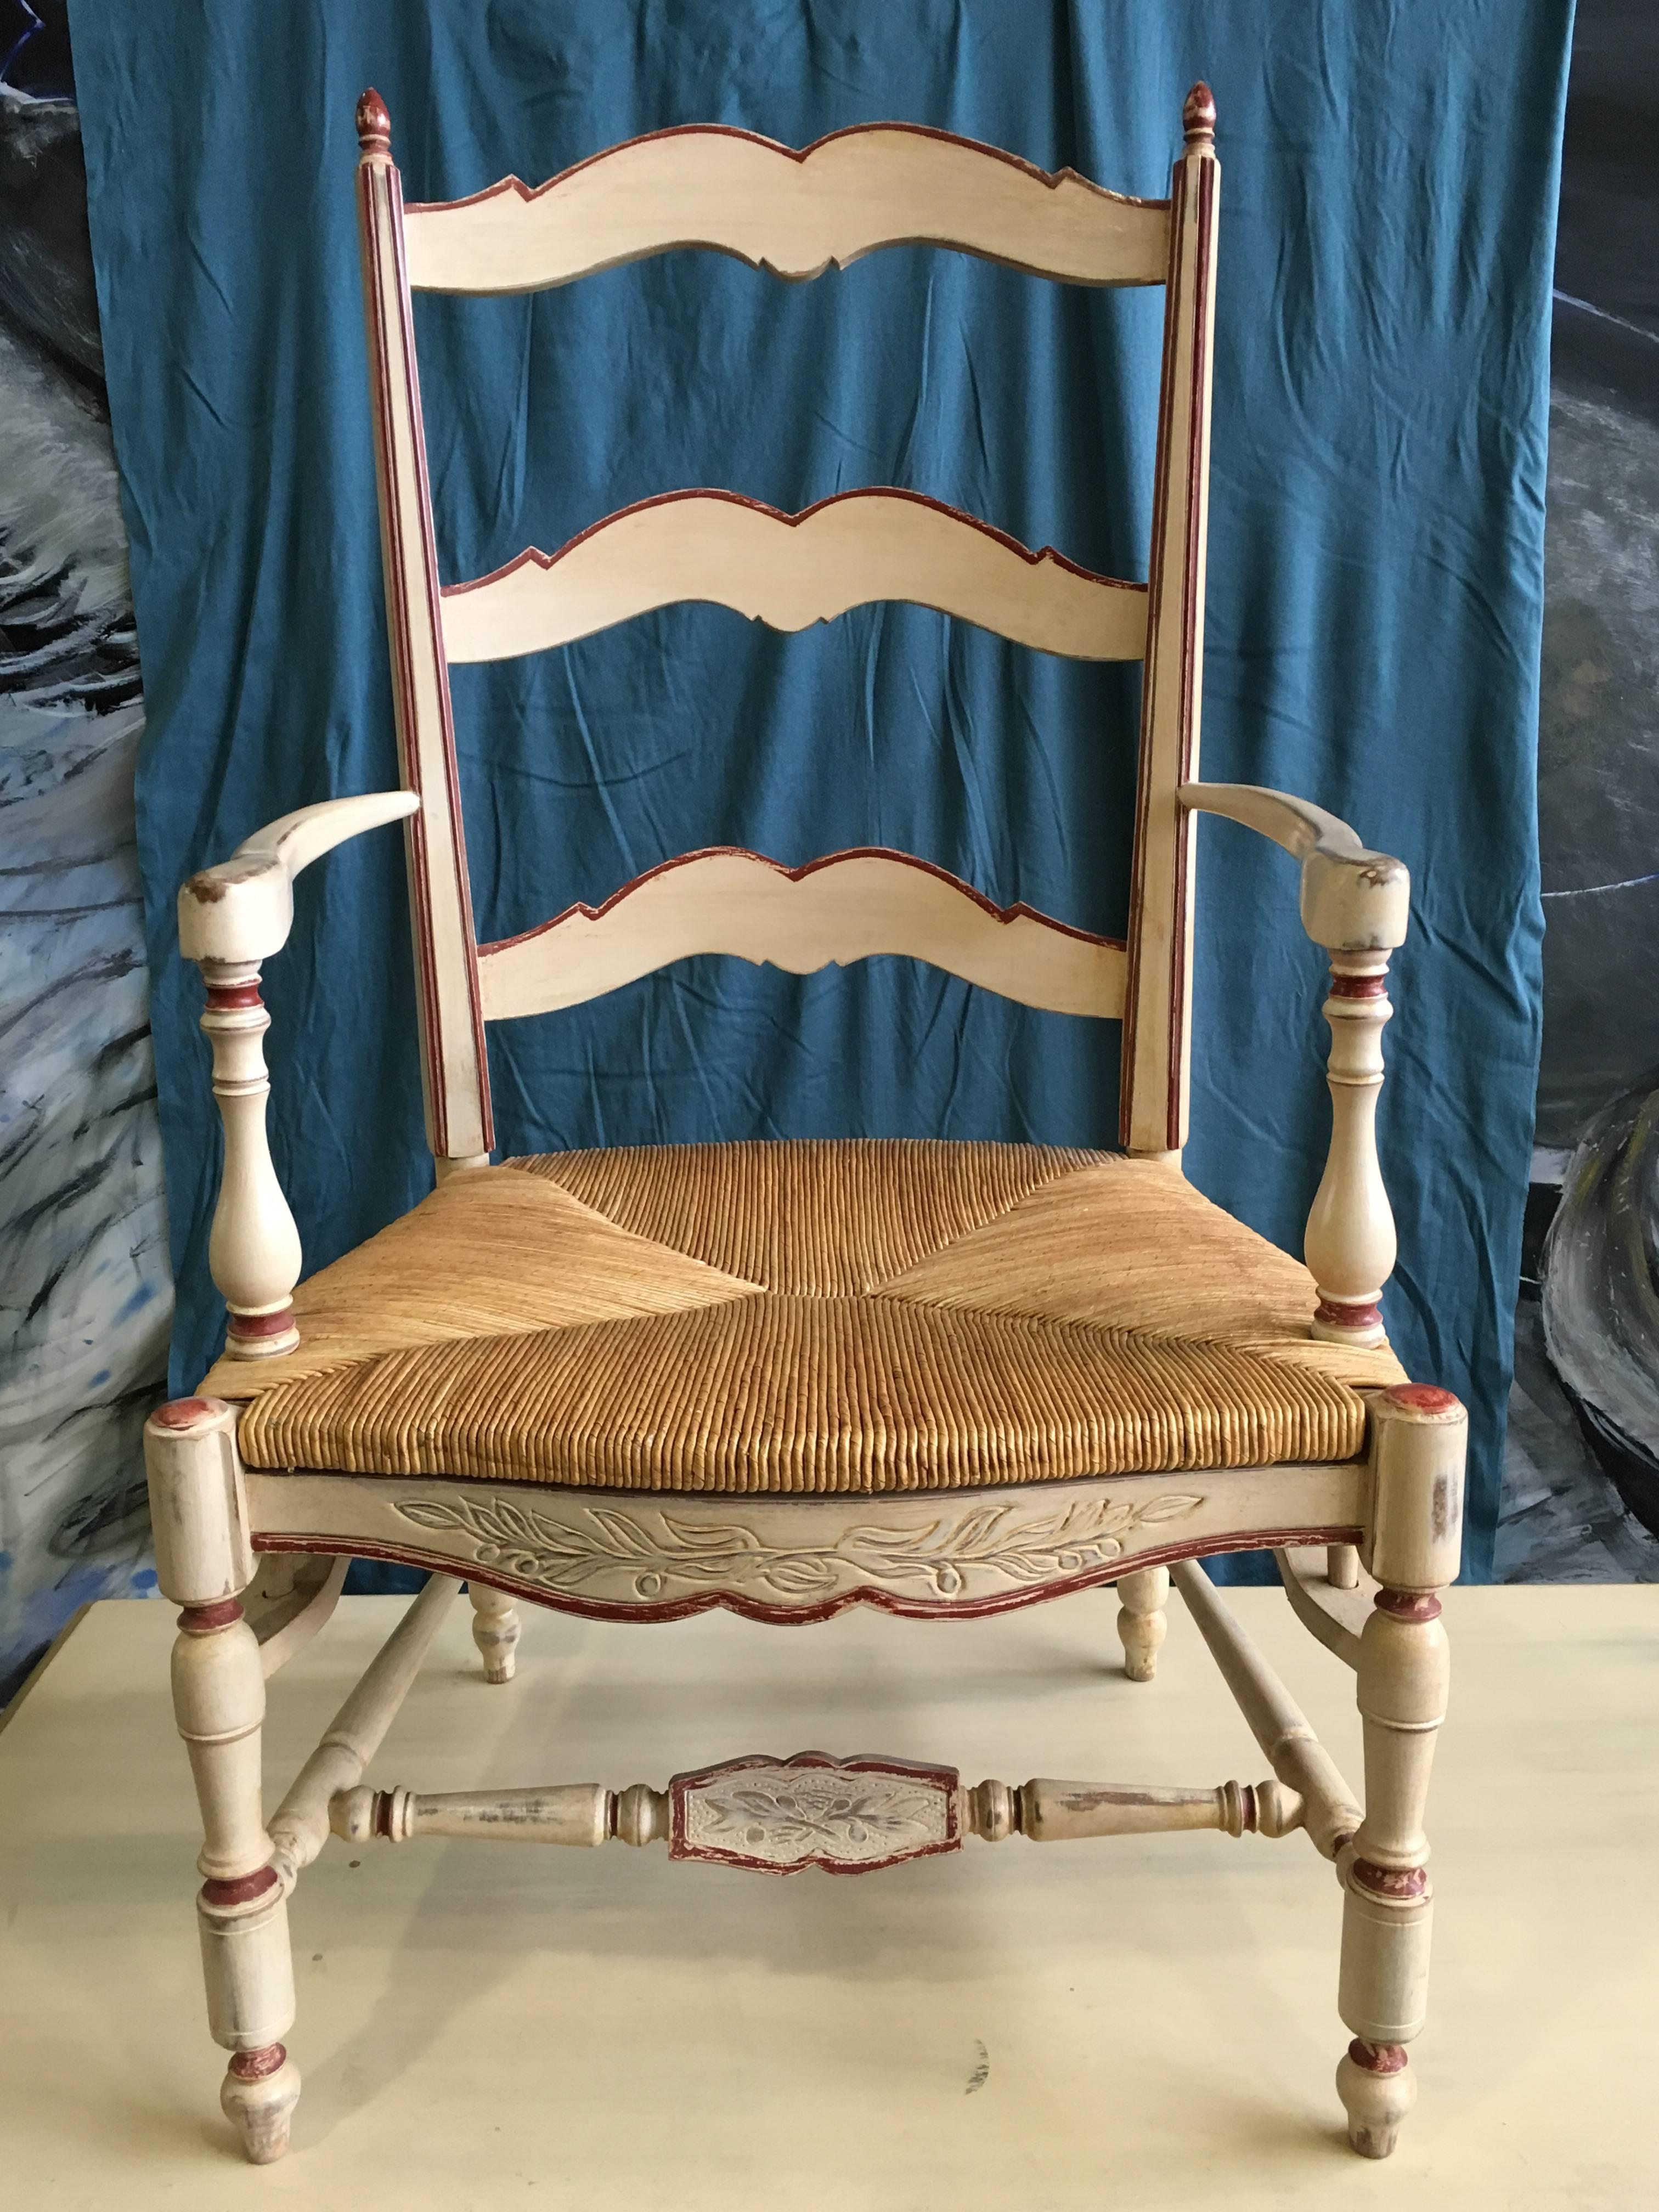 Two dining chairs from 19th century. Made of solid wood, painted in light beige with coral accents, rush seats with nice linen seating cushion in very good condition.
France, circa 1860